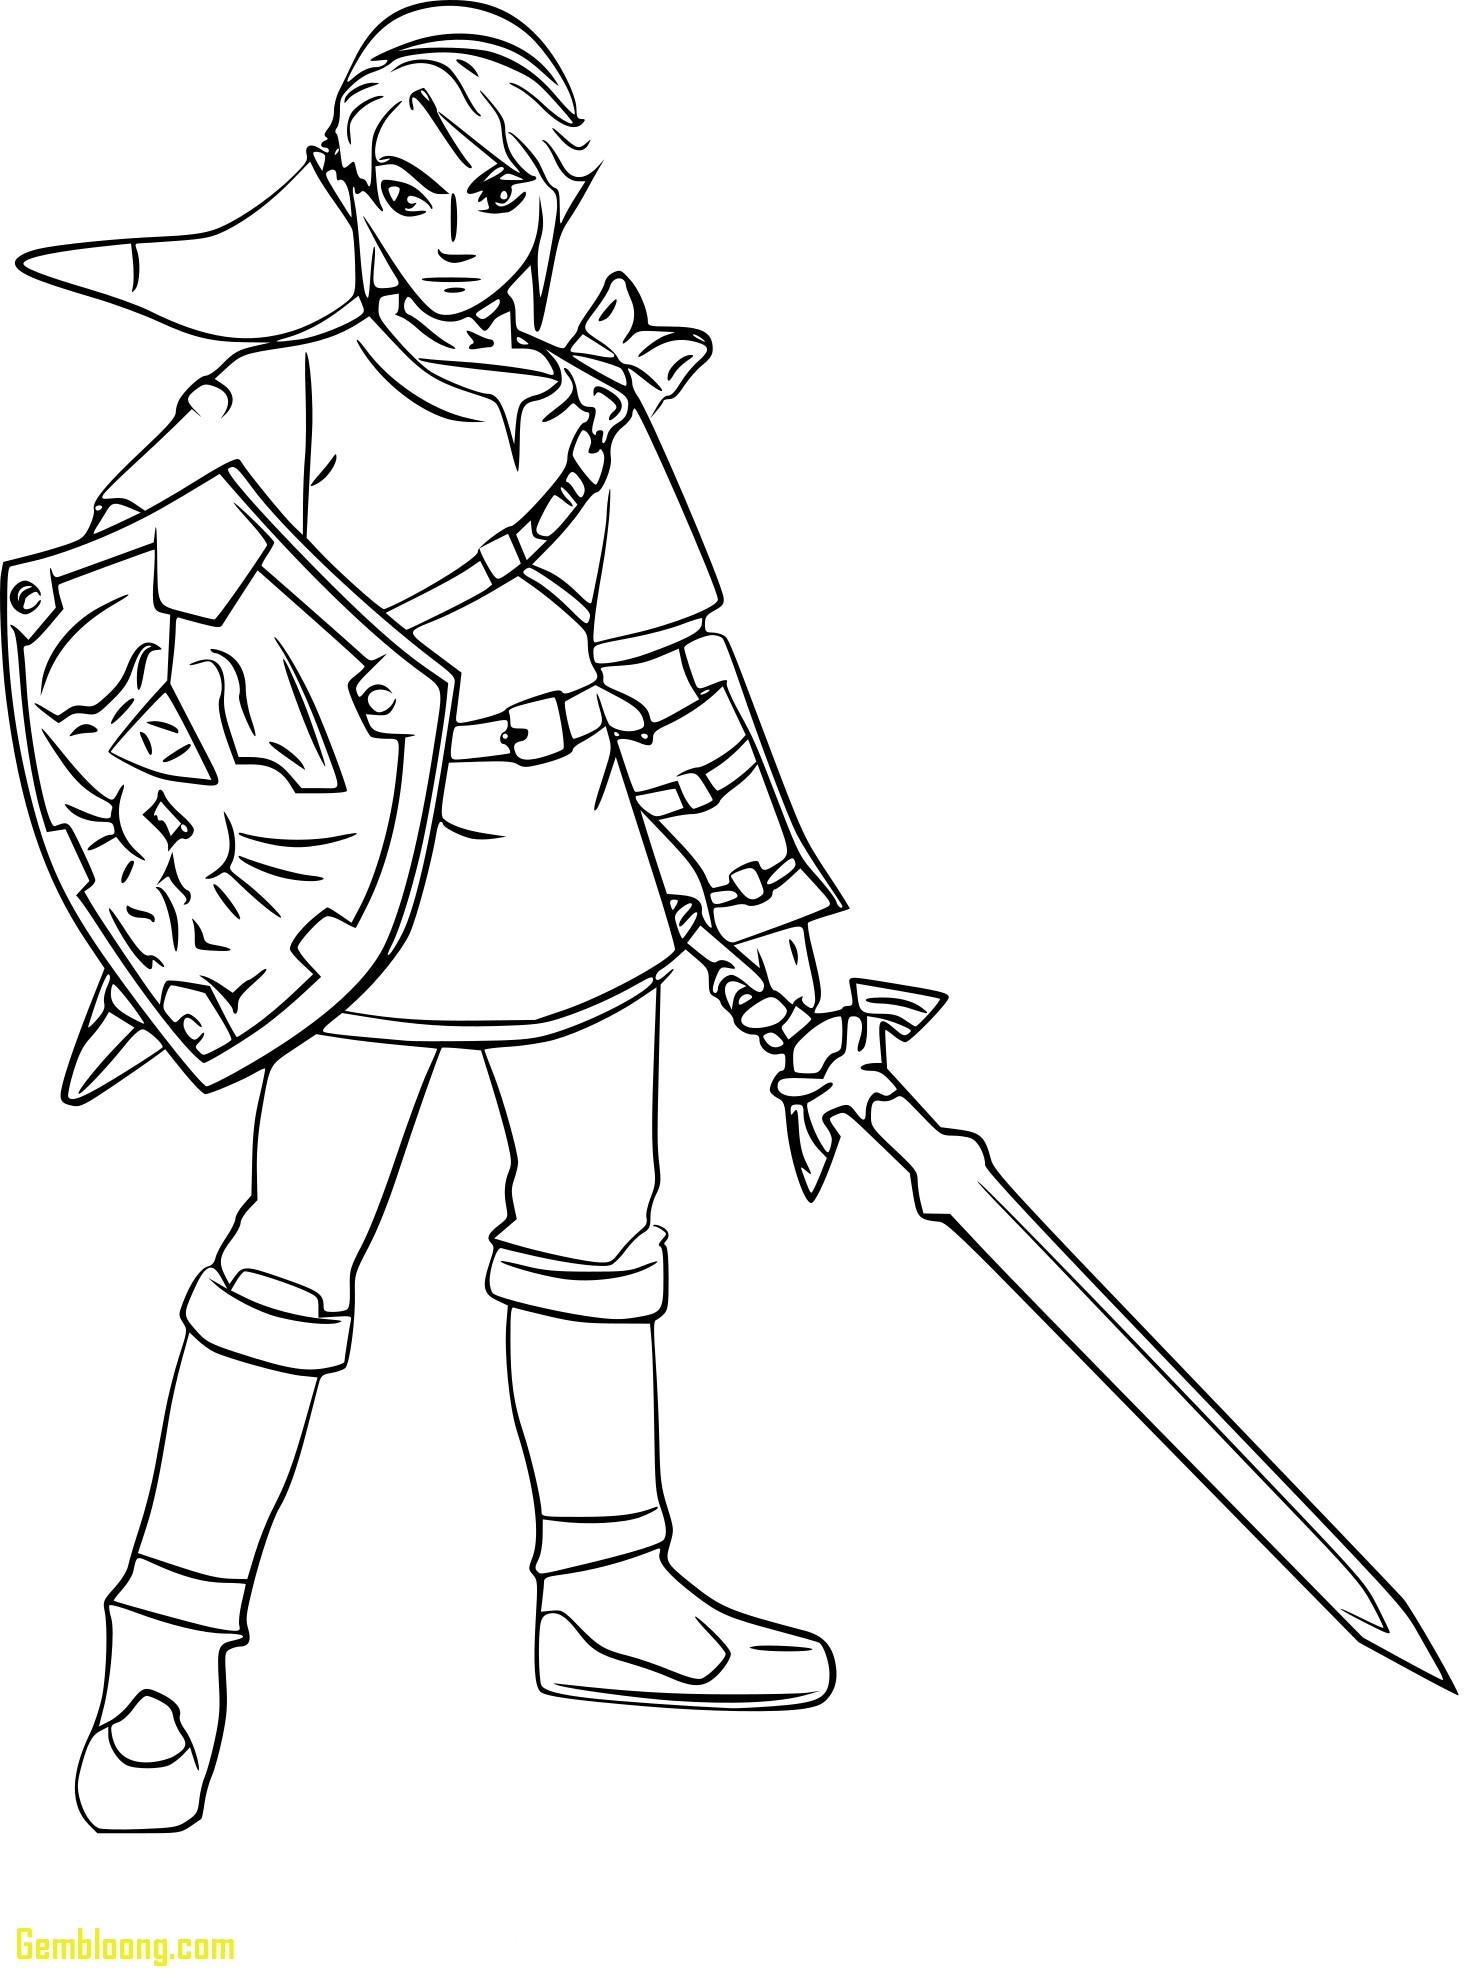 Legend Of Zelda Link Coloring Pages at GetDrawings | Free ...